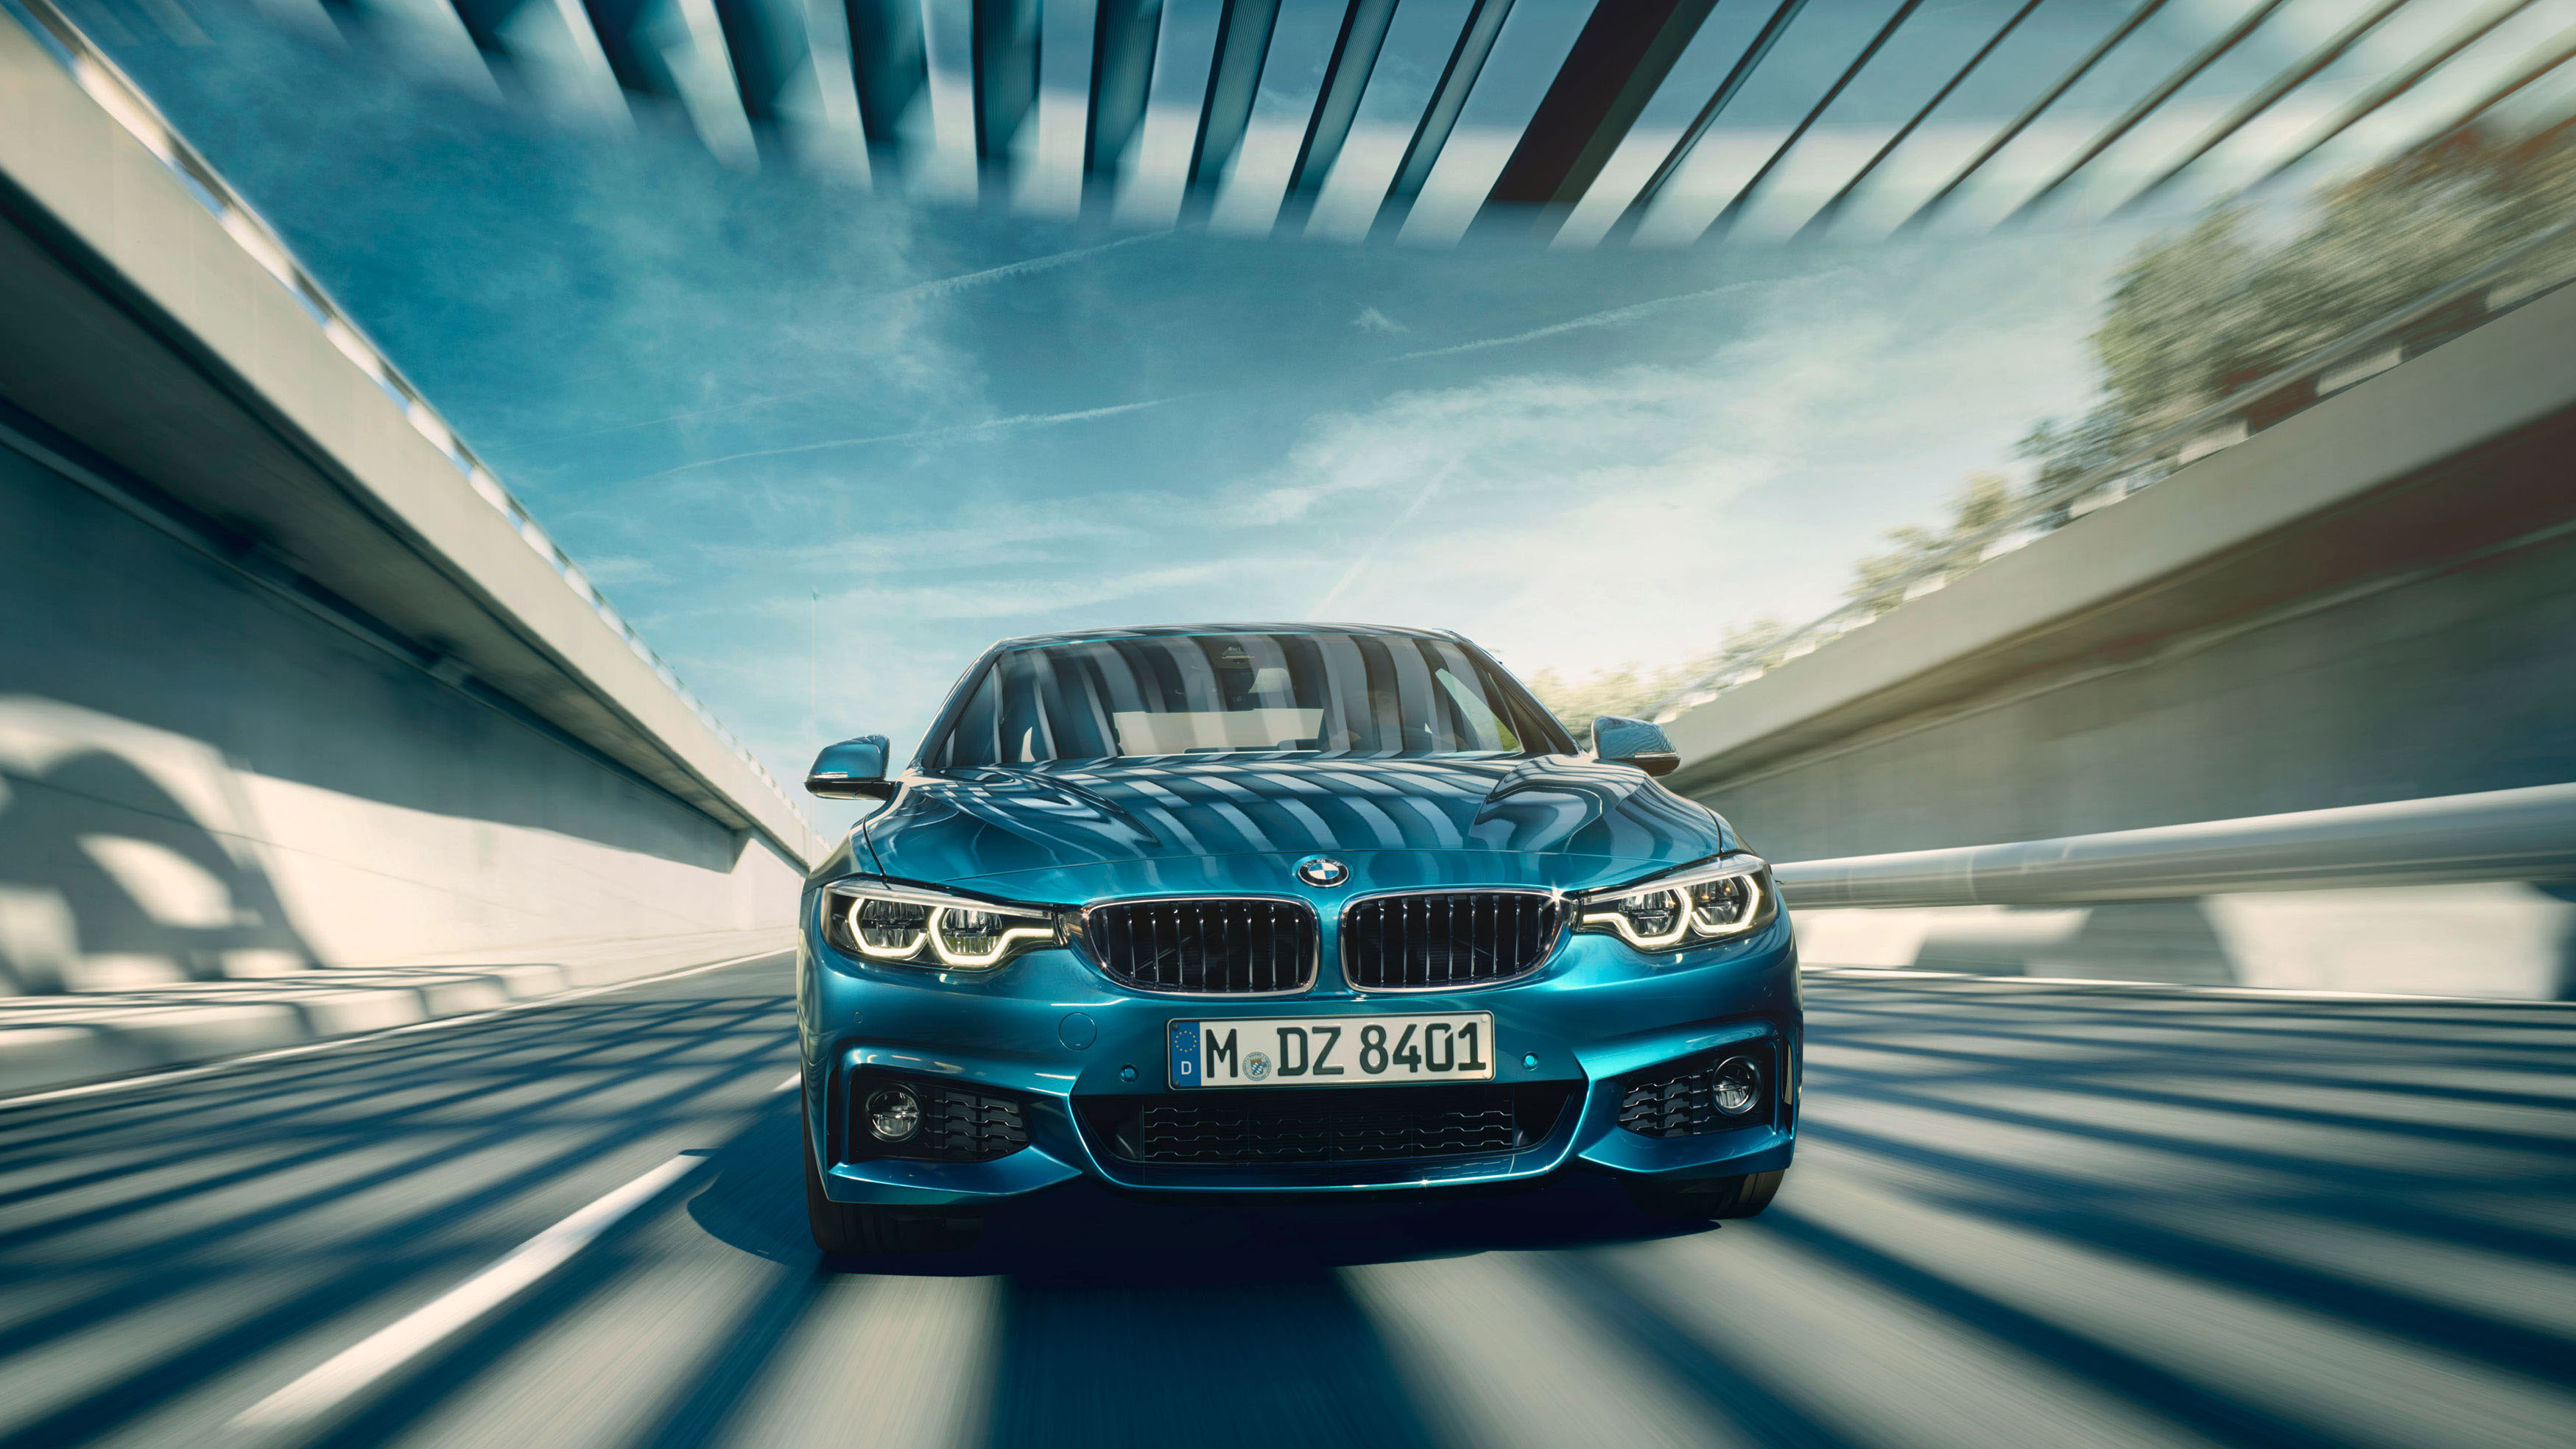 Bmw 4 Series Coupe Wallpapers